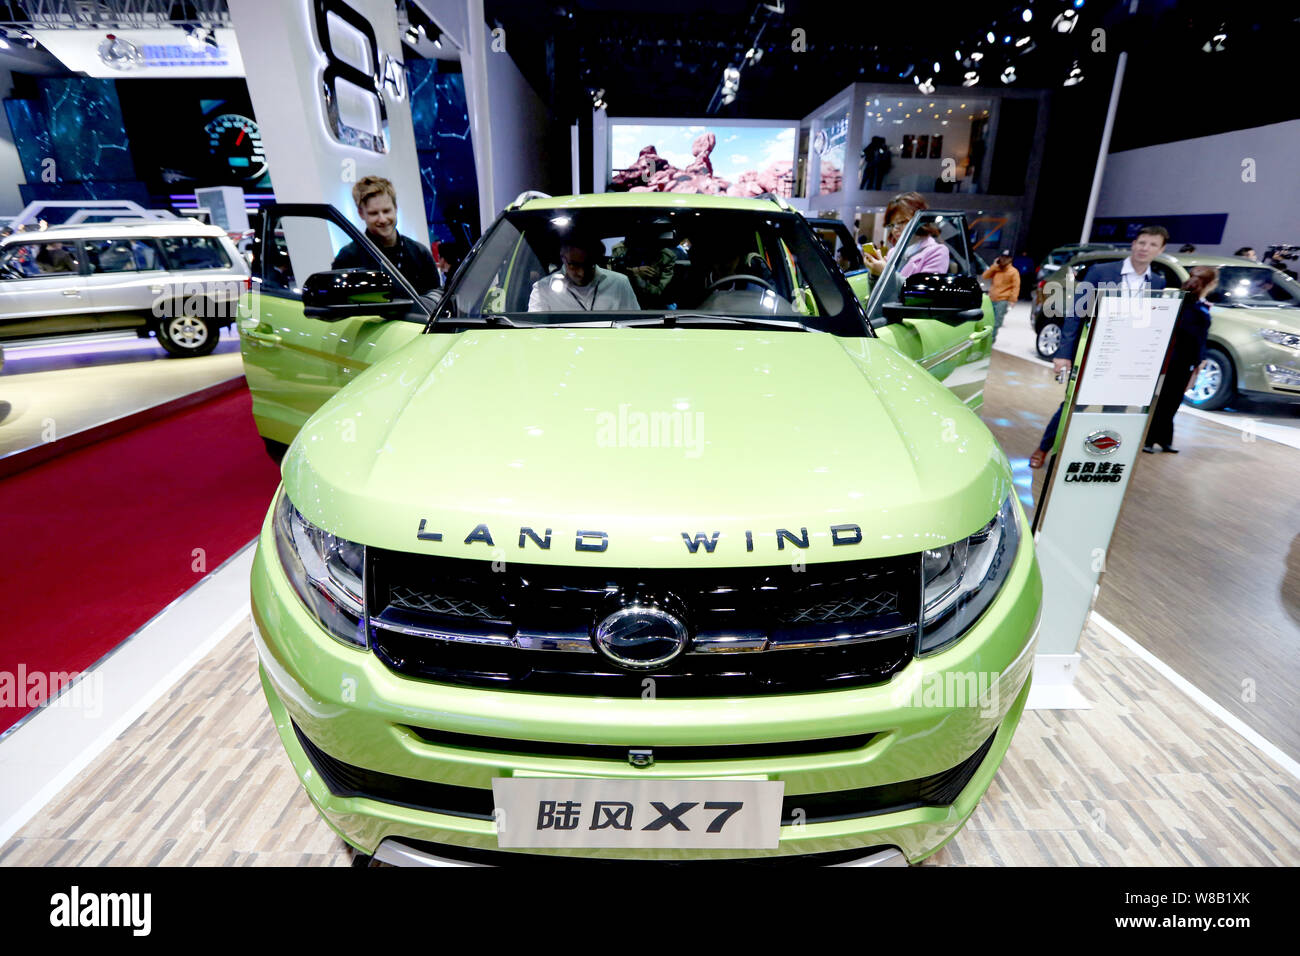 --FILE--Visitors try out or look at a Landwind X7 SUV of JMC (Jiangling Motor Co.), which resembles the Range Rover Evoque of Jaguar Land Rover, durin Stock Photo